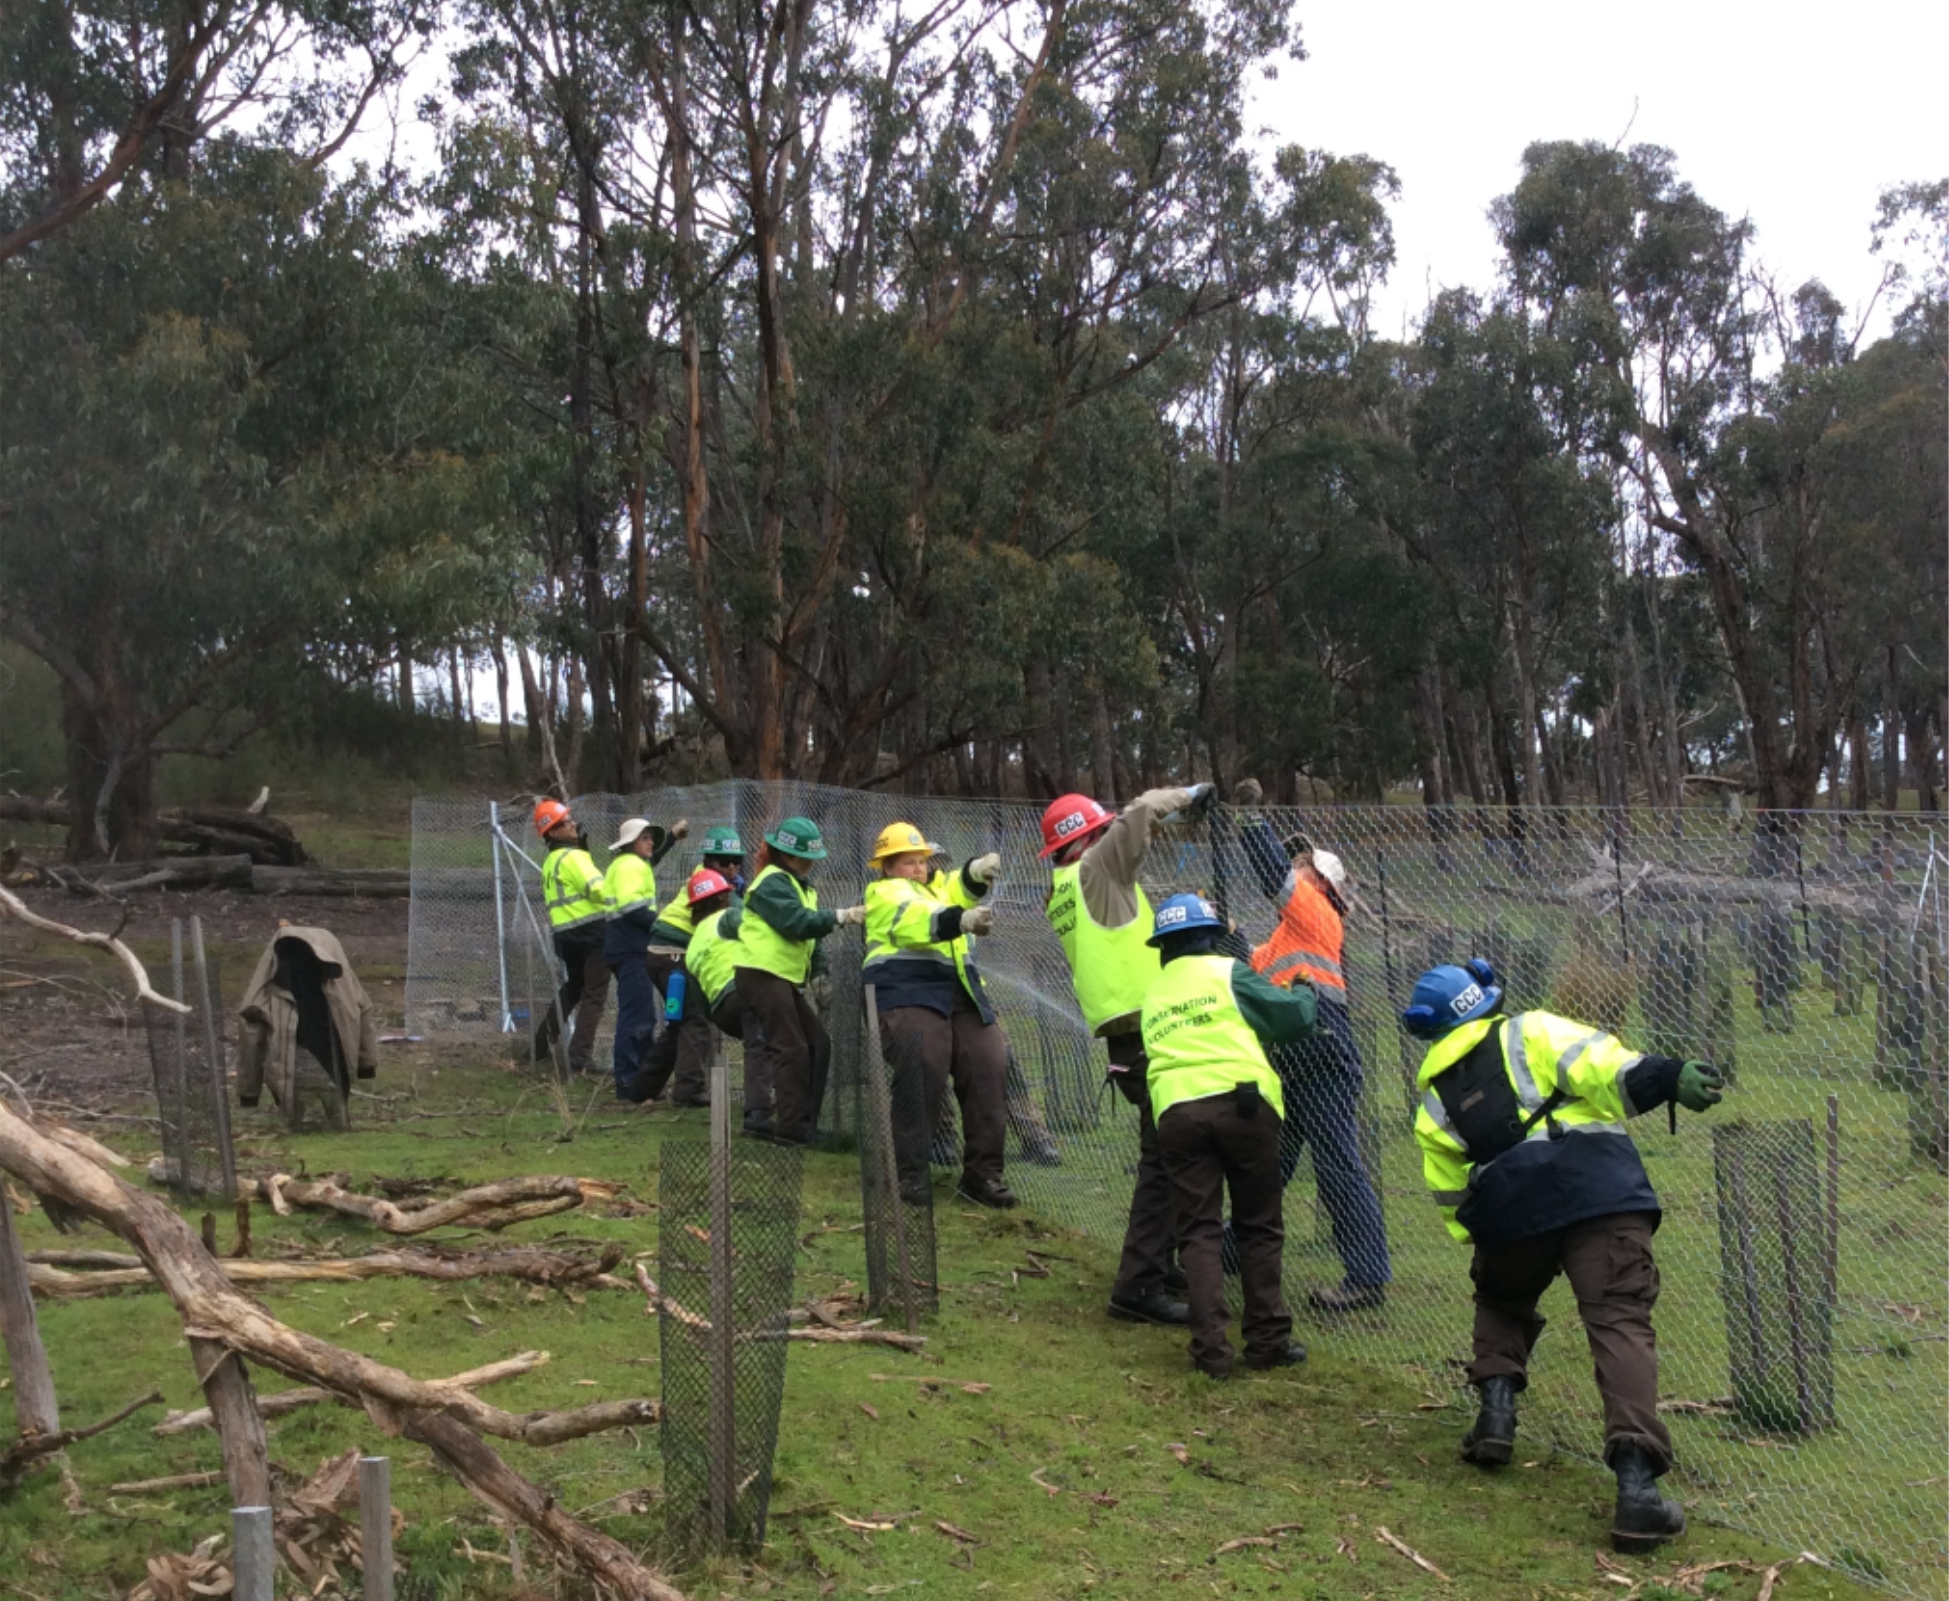 Image. Group of Corpsmembers, staff and Australian partners work togehter to construct fencing around native trees.